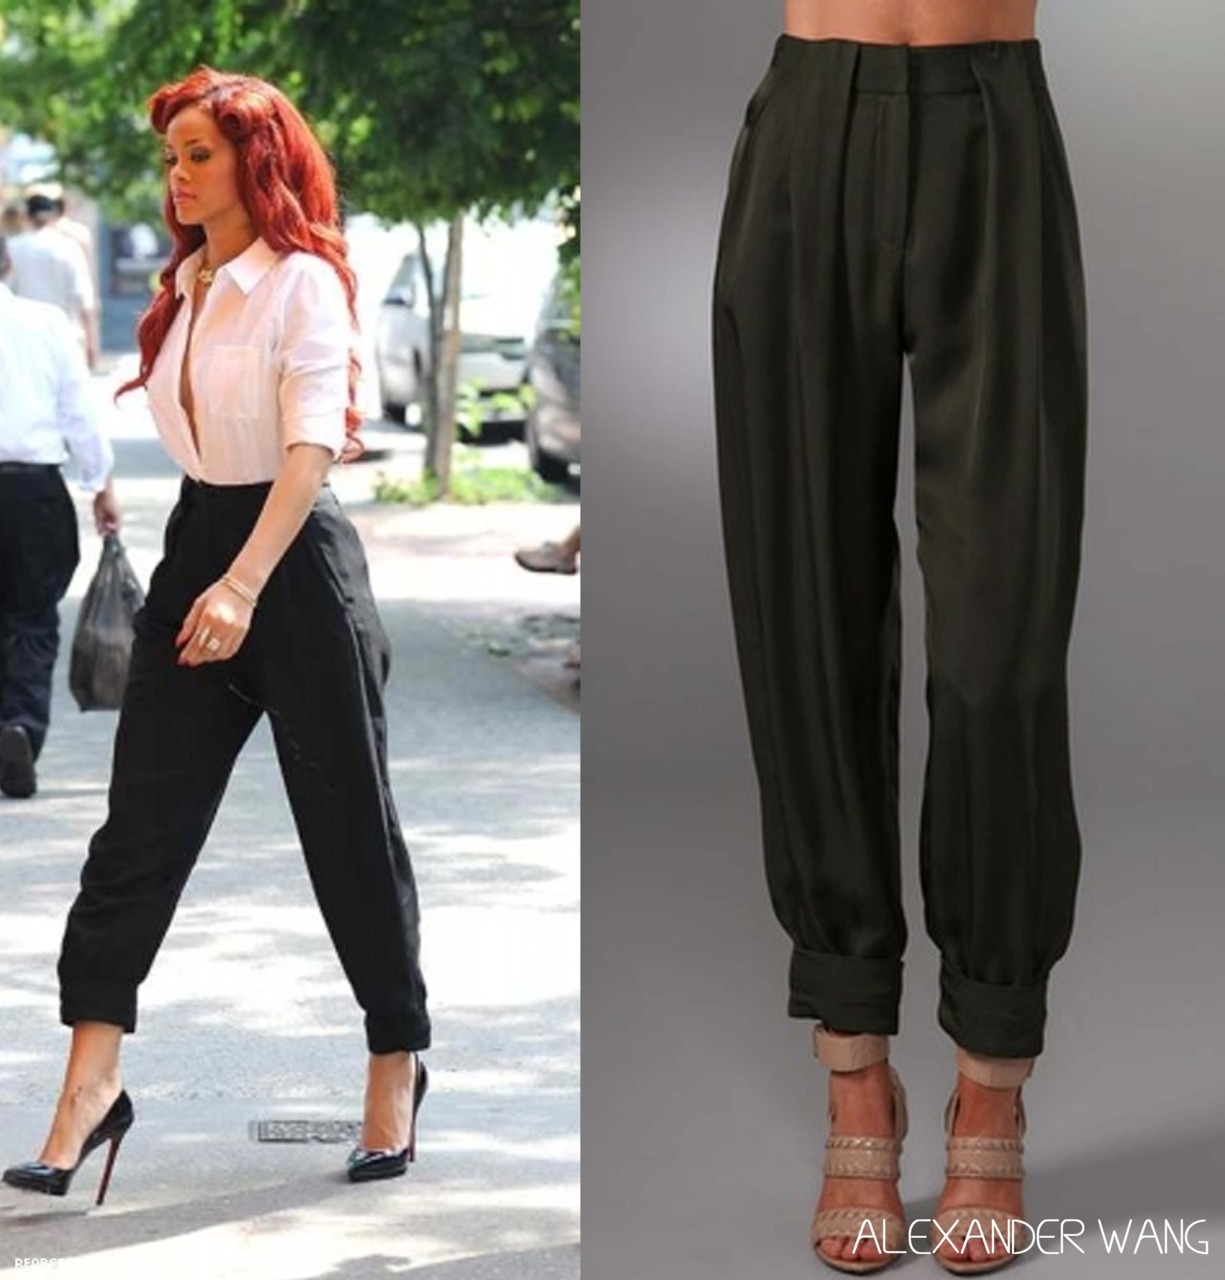 Rihanna seen leaving Da Silvano restaurant in New York in Alexander Wang. If interested they are available to buy from Shopbop for $294.00 click HERE to view